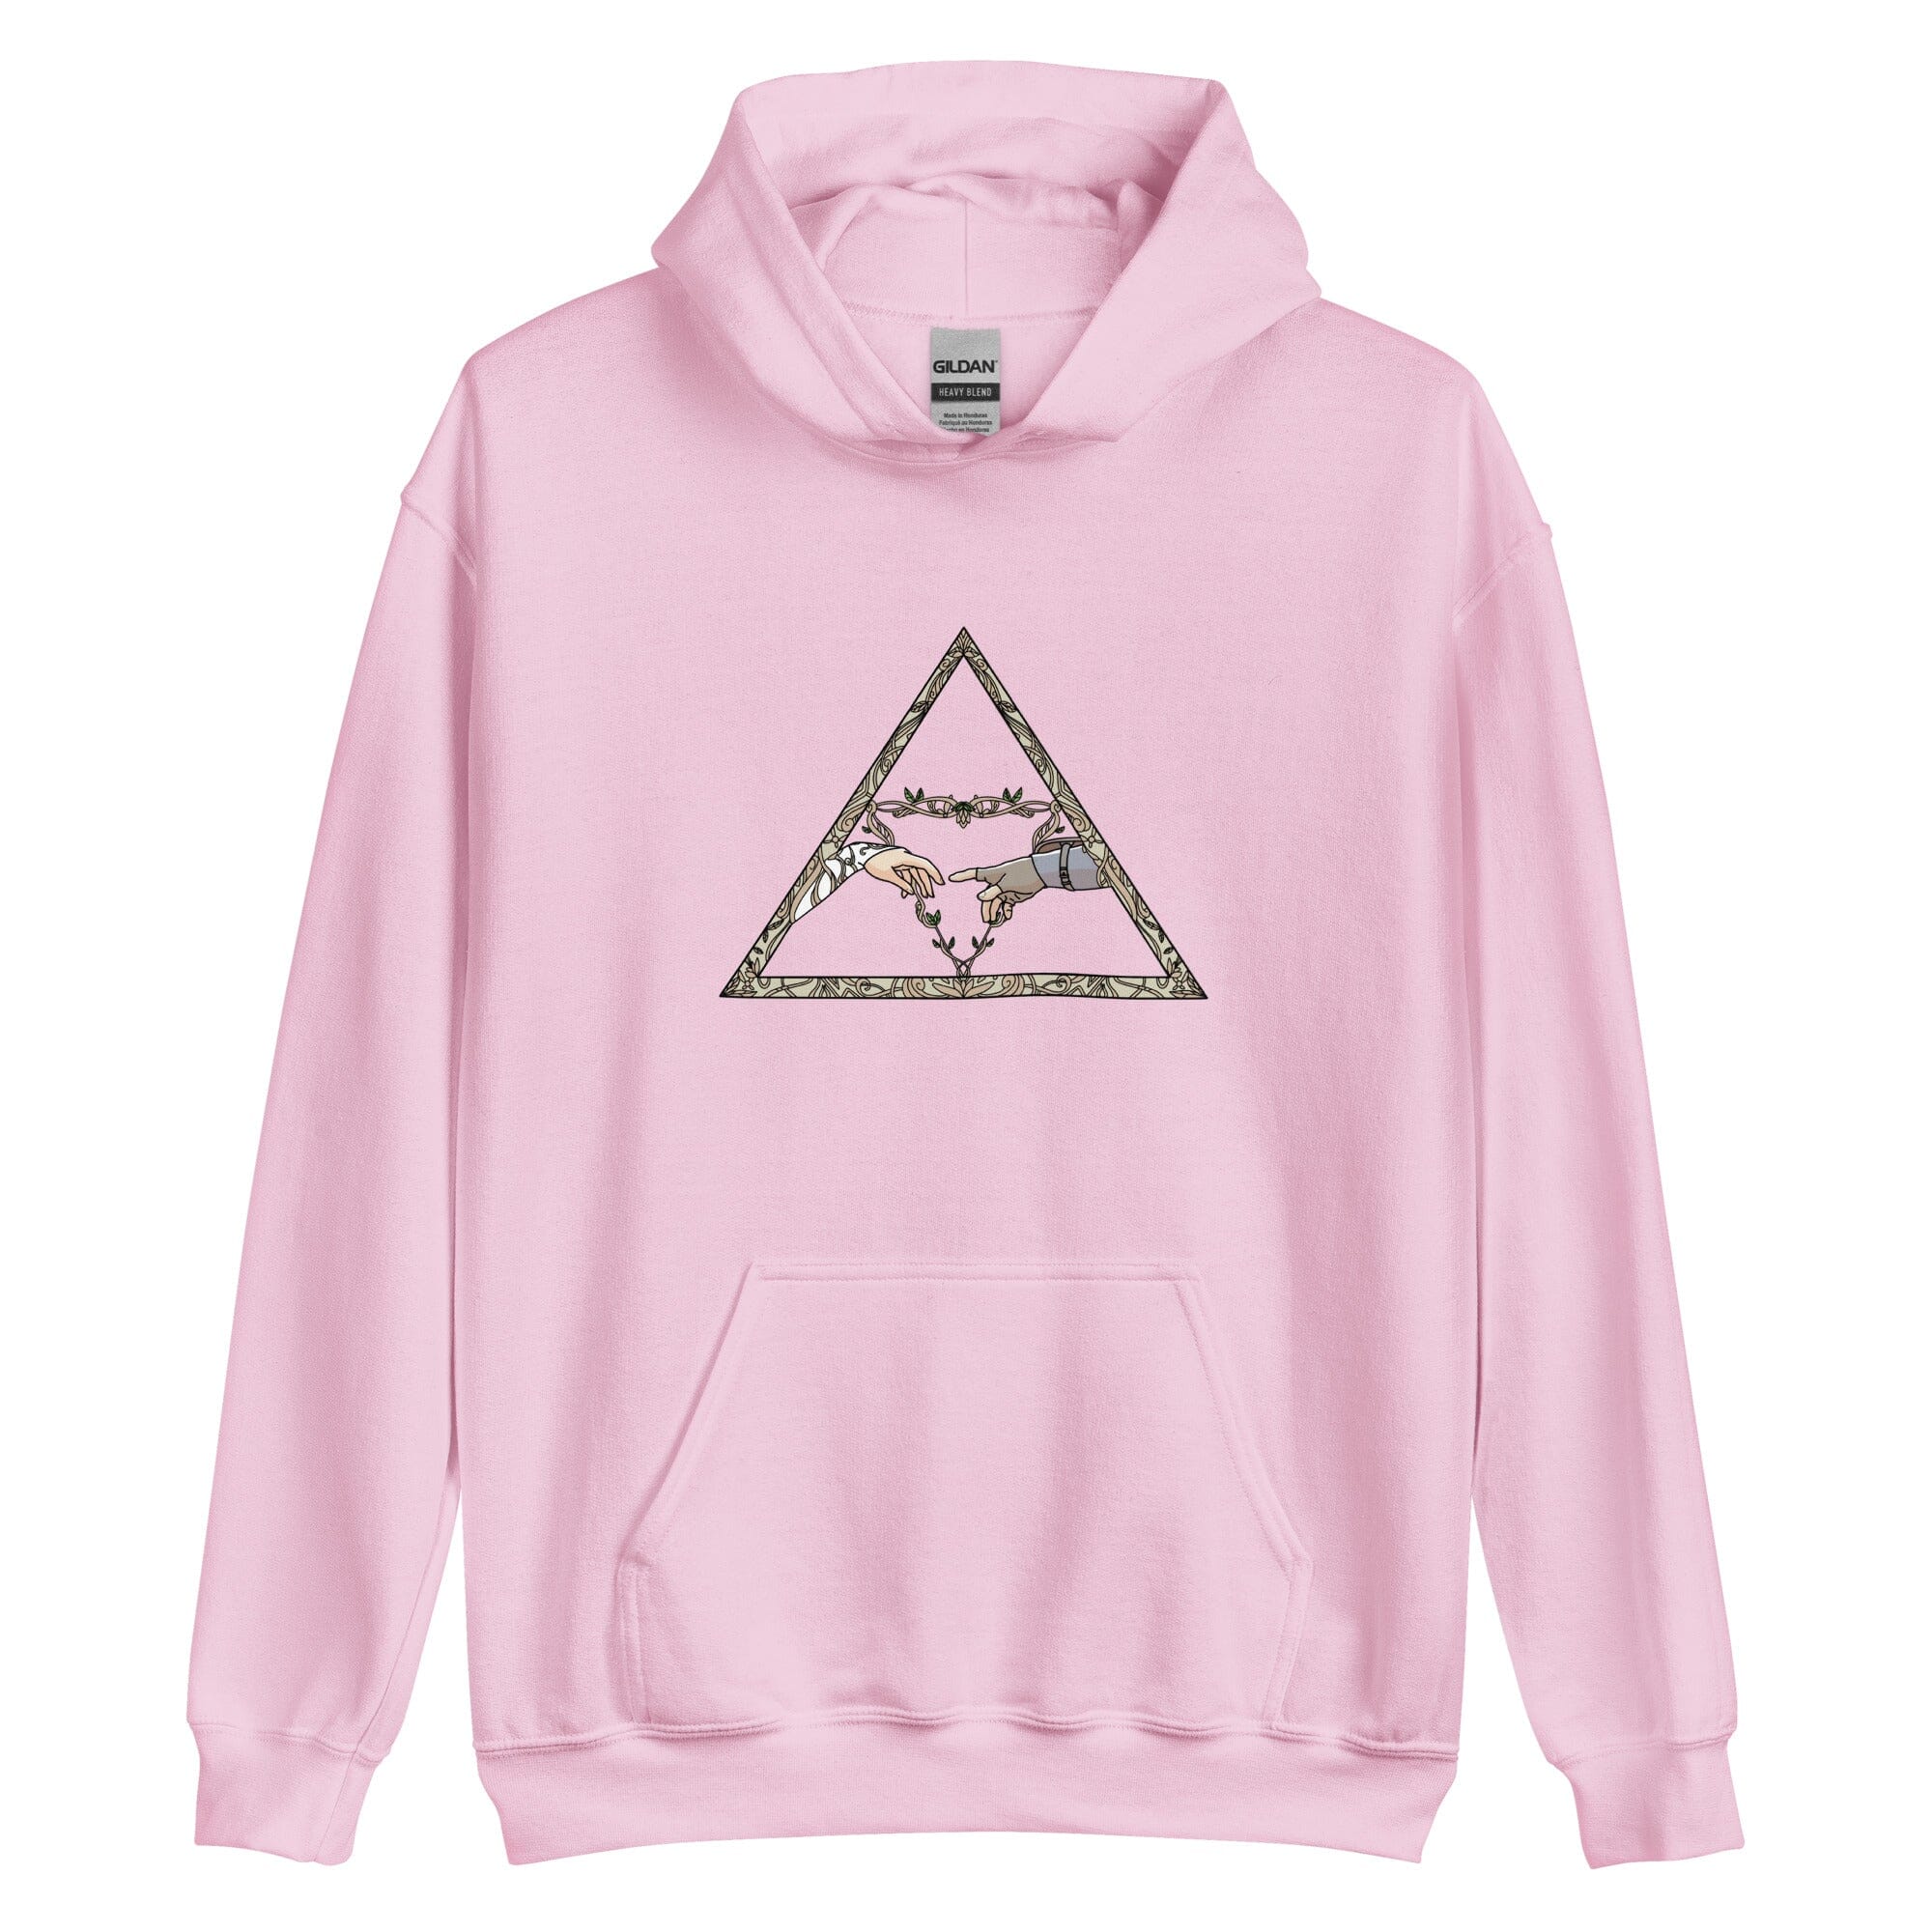 The Creation | Unisex Hoodie | The Legend of Zelda Hoodies Threads and Thistles Inventory Light Pink S 